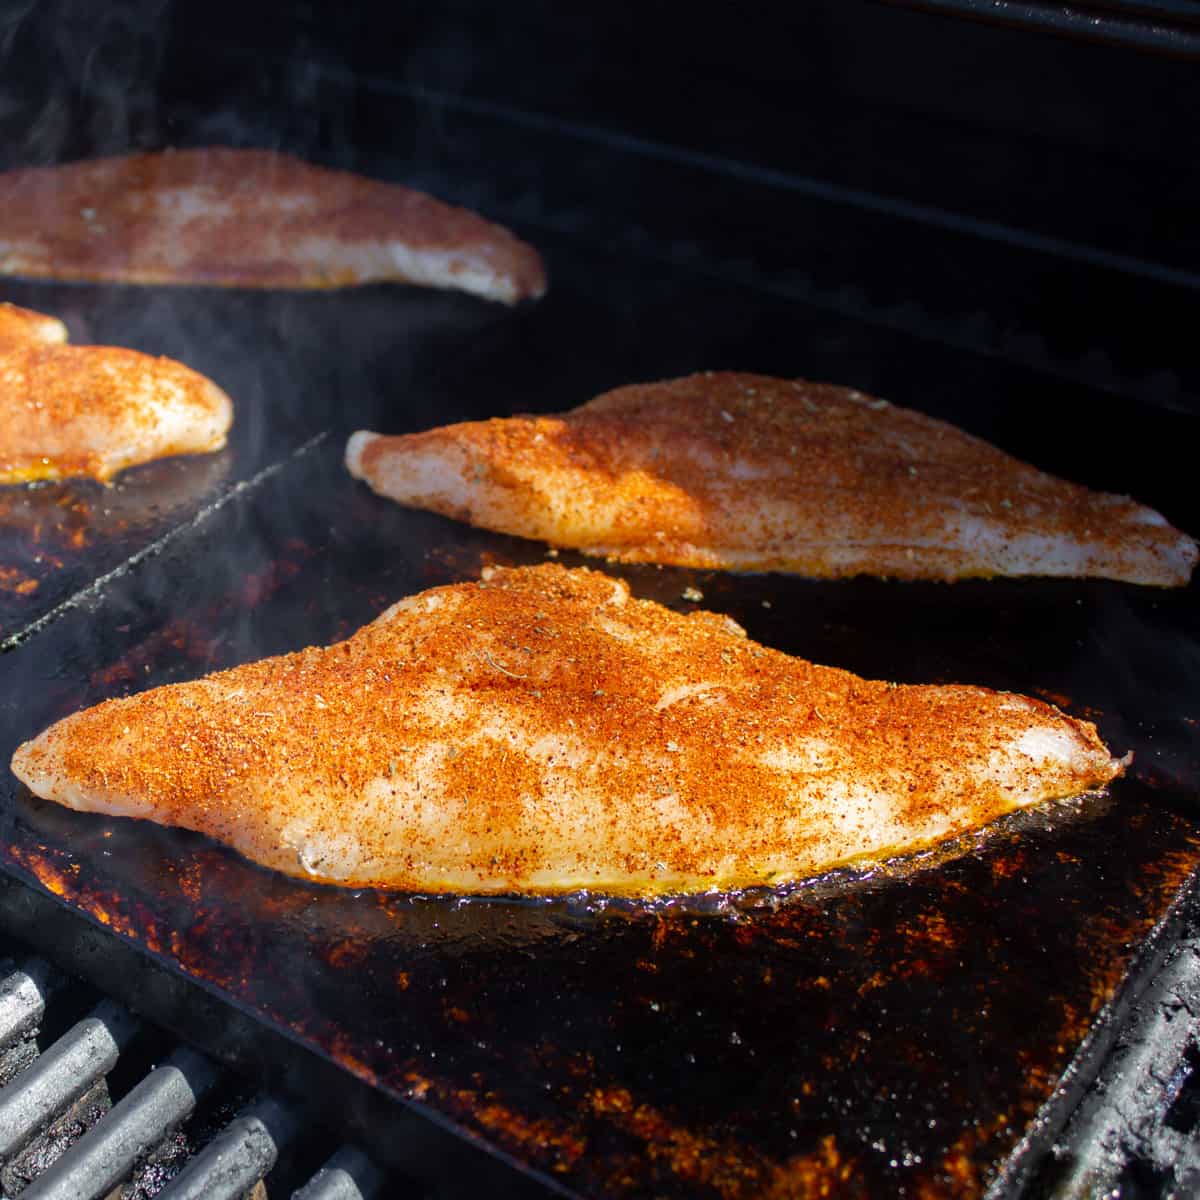 Fish cooking on a grilling stone.